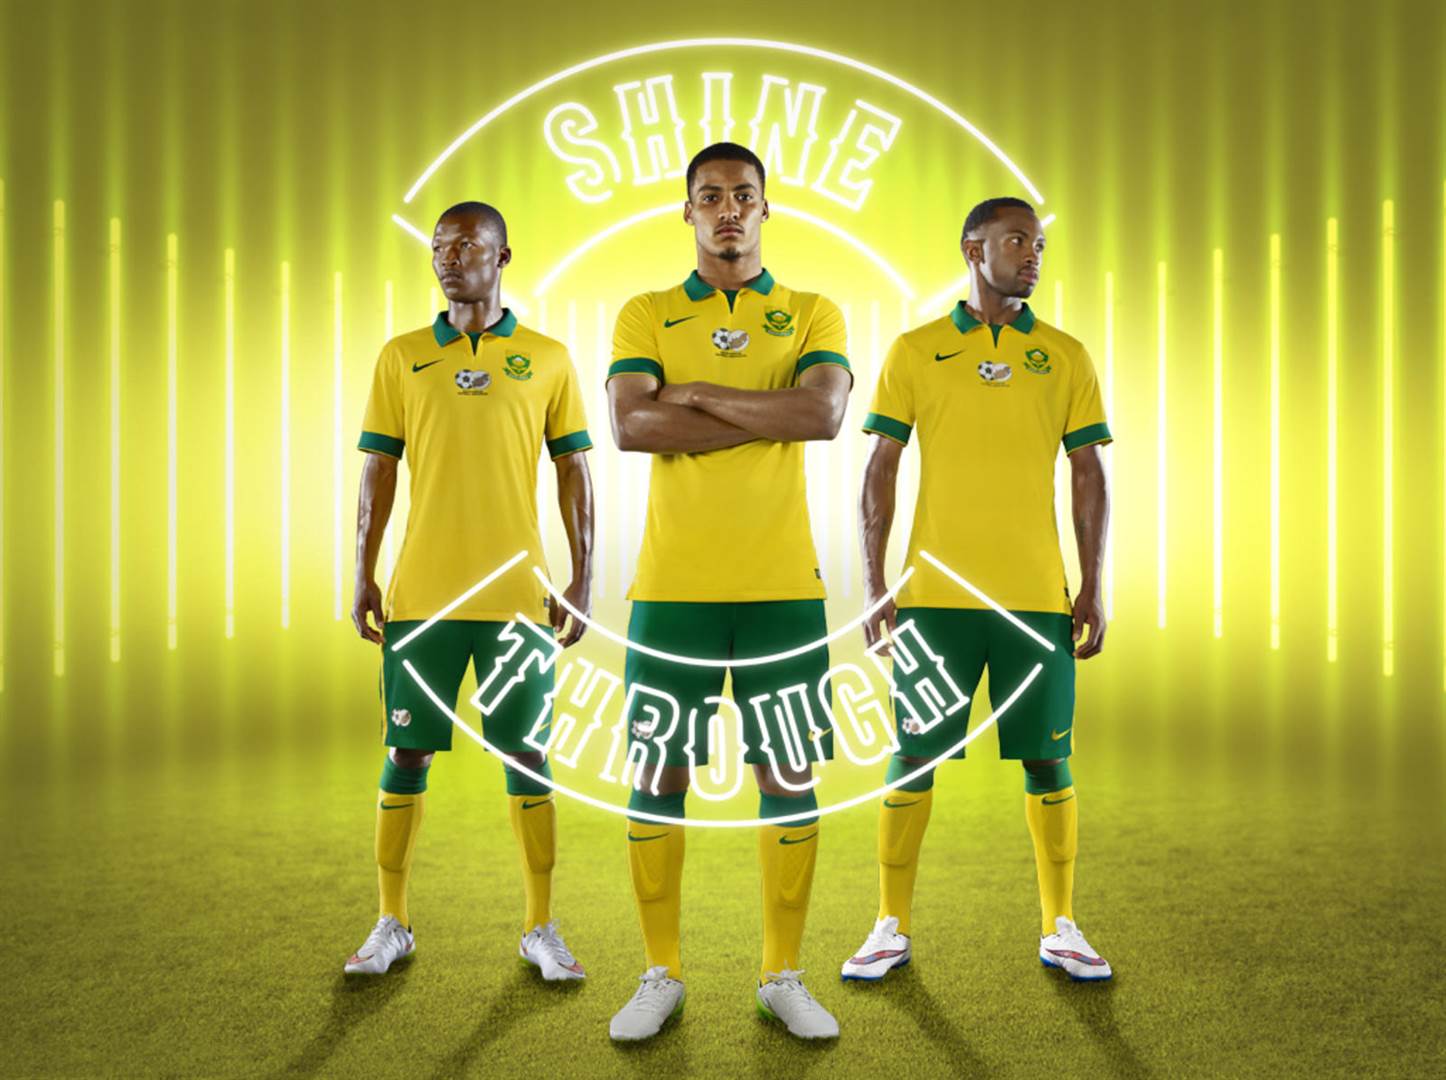 South Africa Fifa World Cup wallpaper - Free Desktop HD iPad iPhone  wallpapers